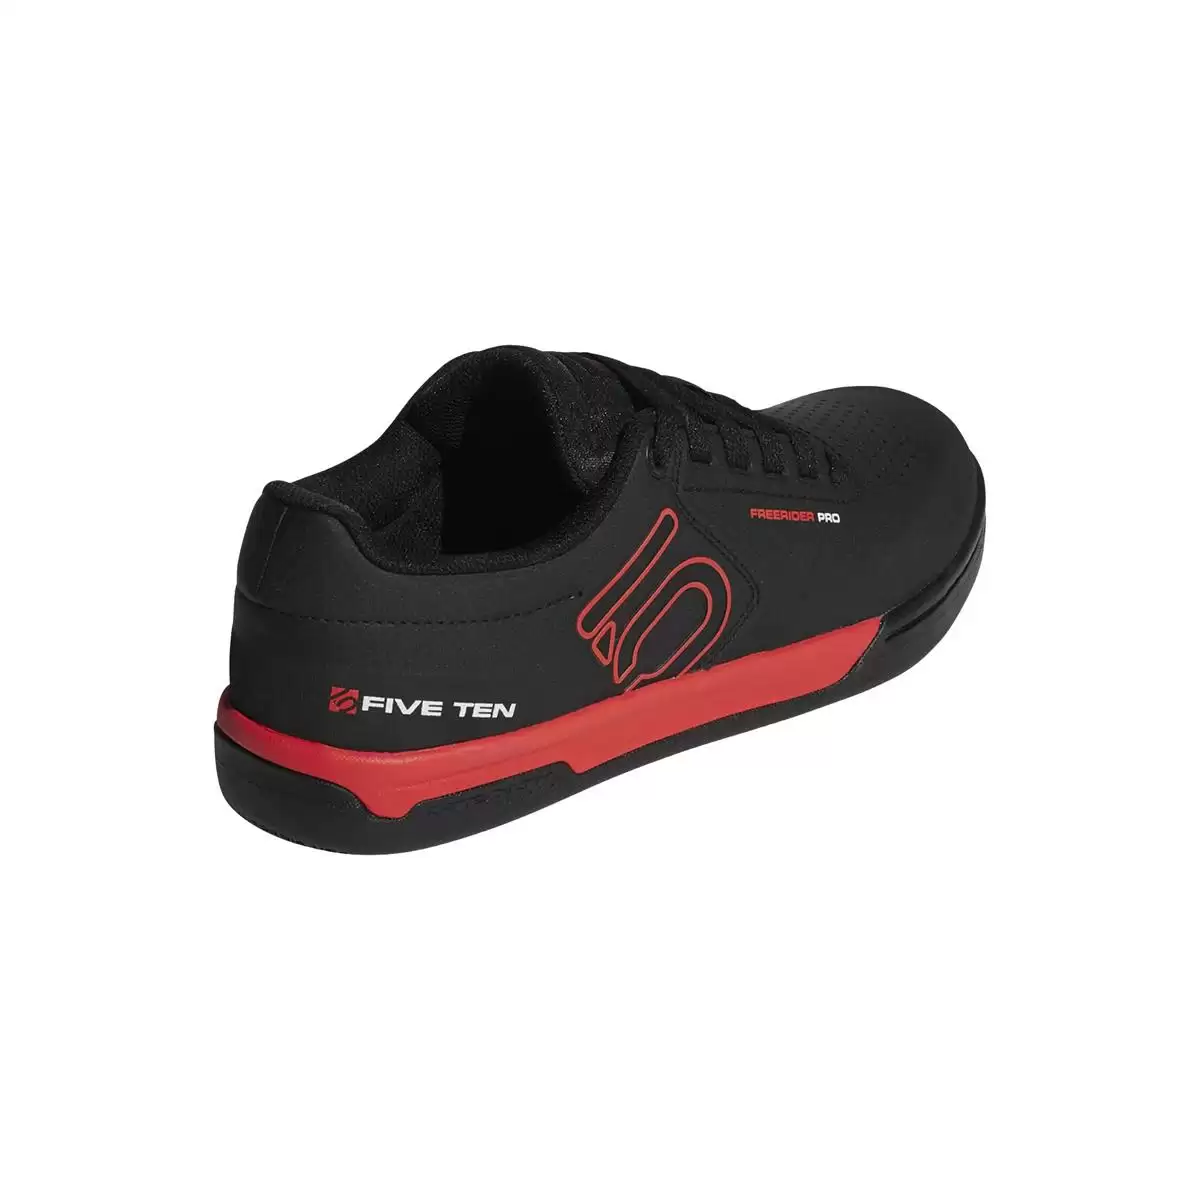 Chaussures Plates VTT Freerider Pro Noir/Rouge Taille 41 #2